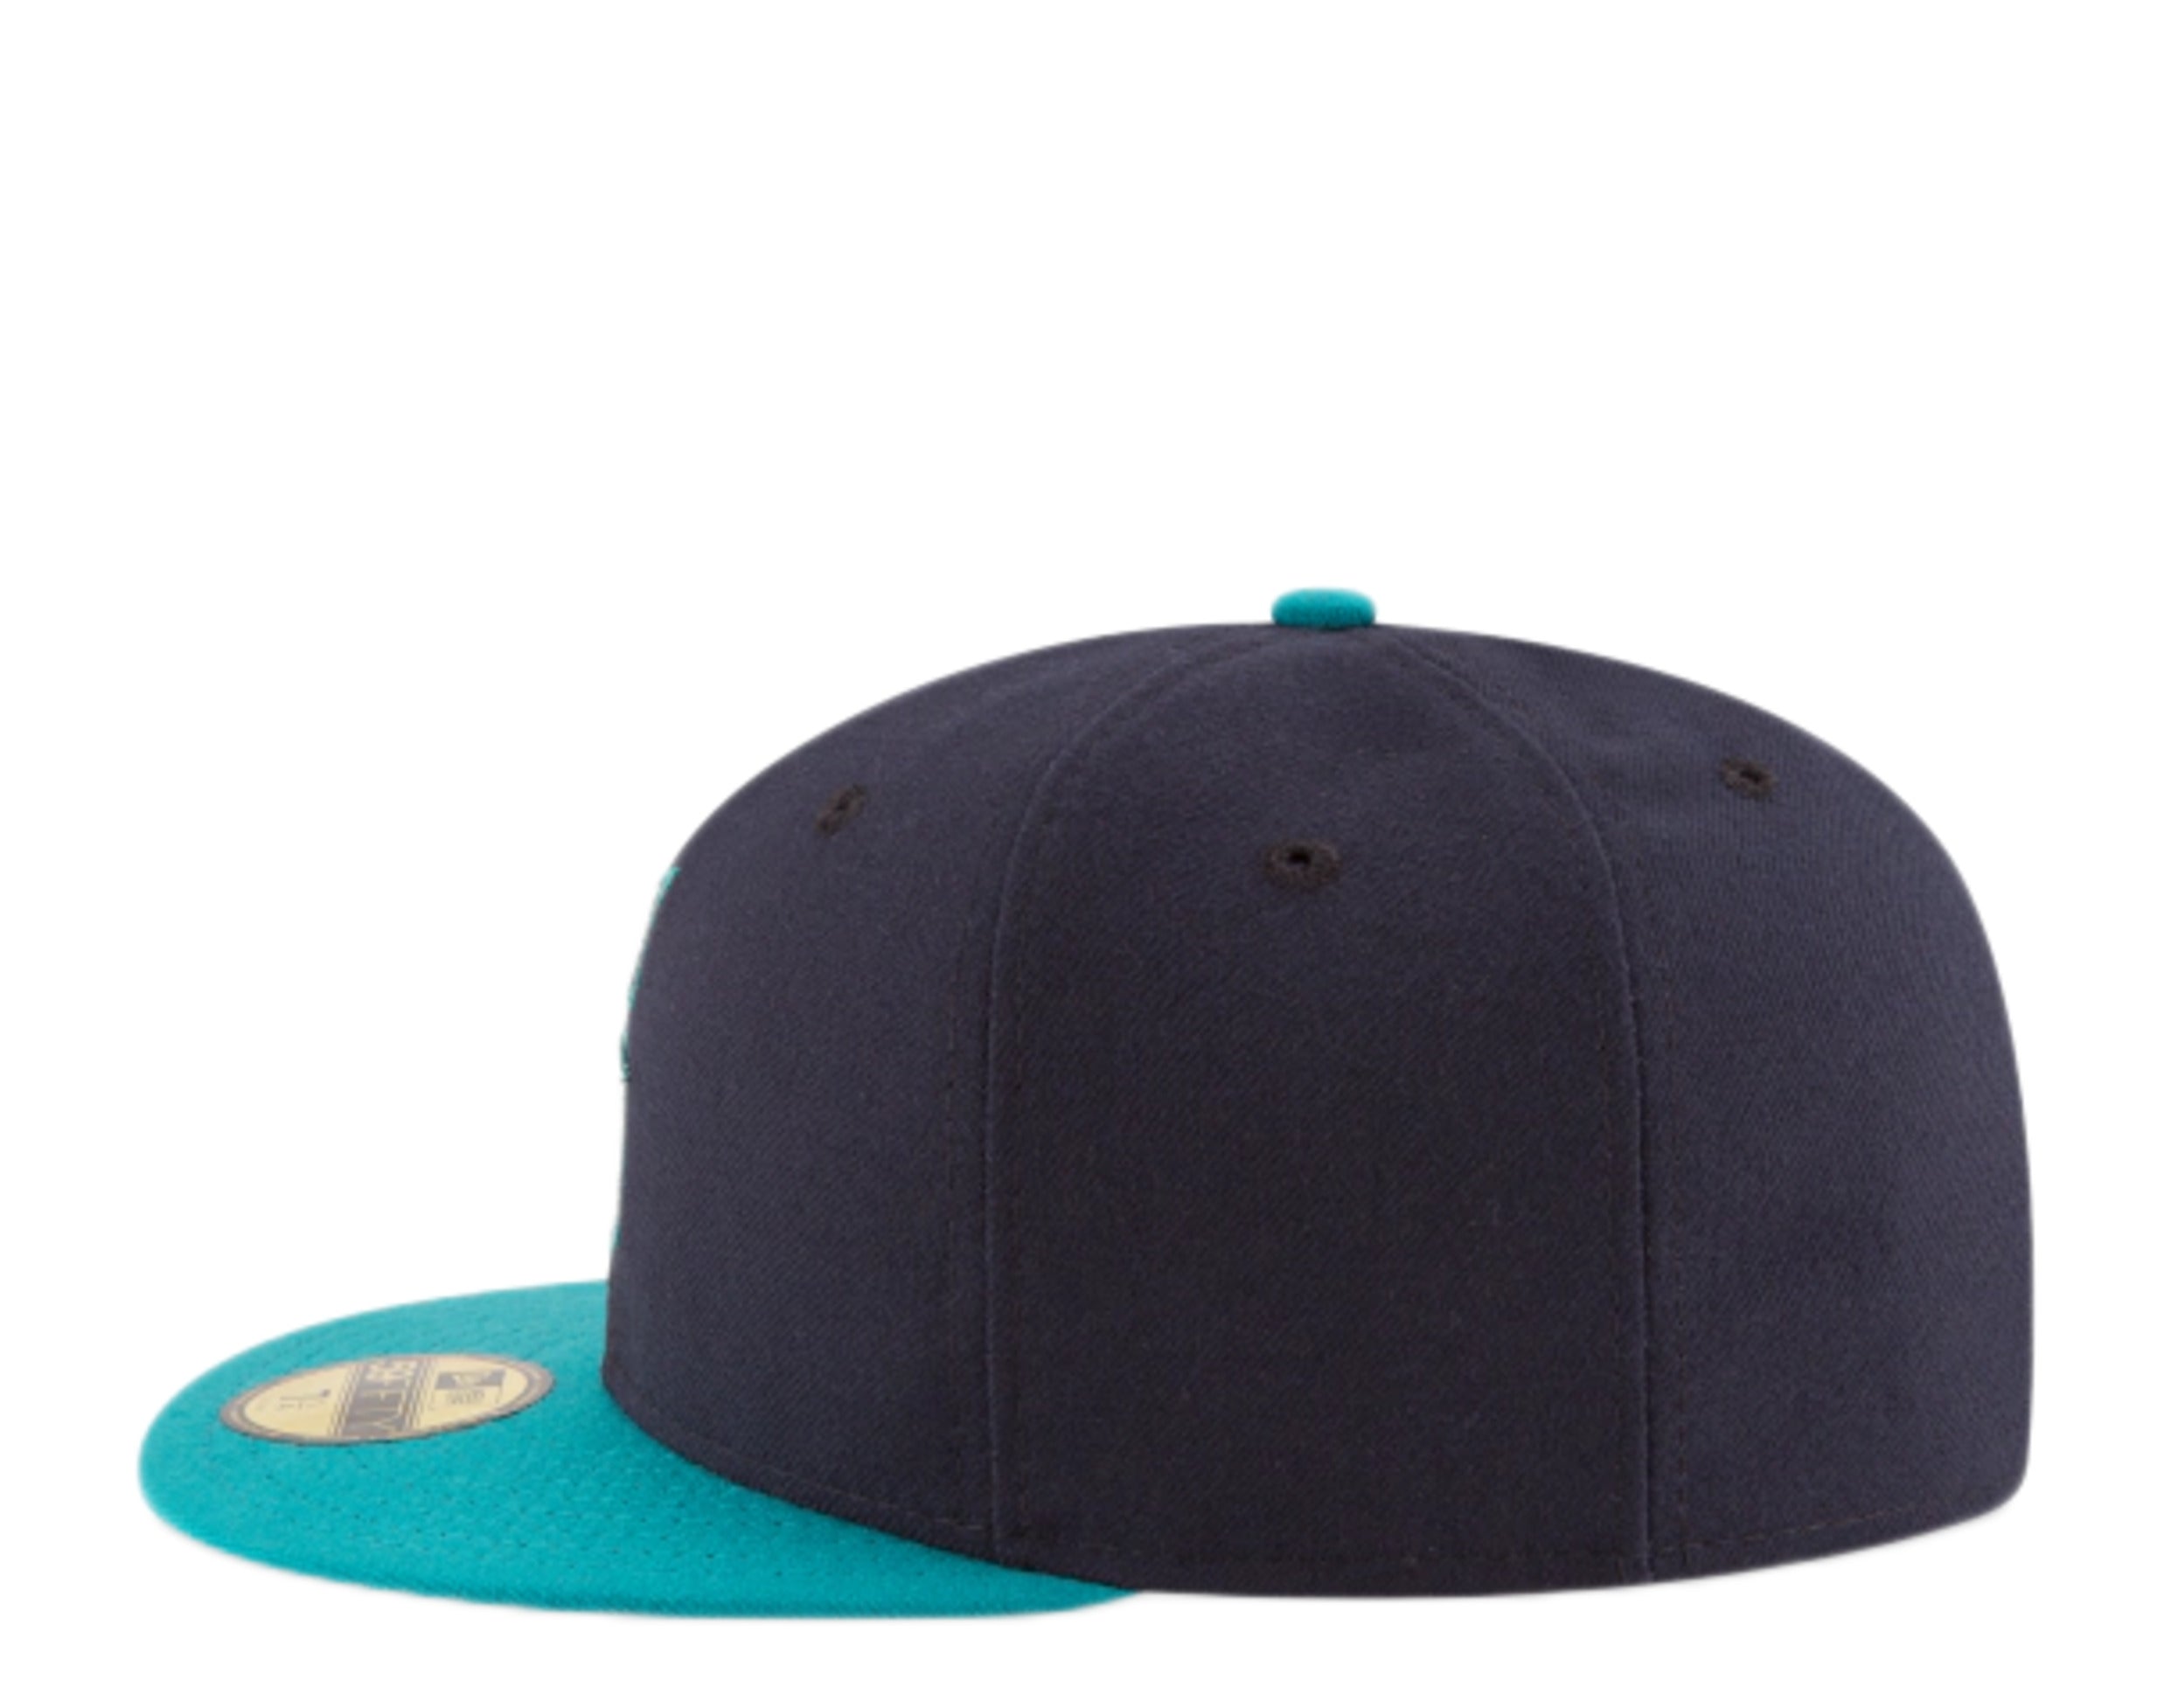 New Era Seattle Mariners ALT 59Fifty Fitted Hat (Dark Navy/Teal) MLB Cap